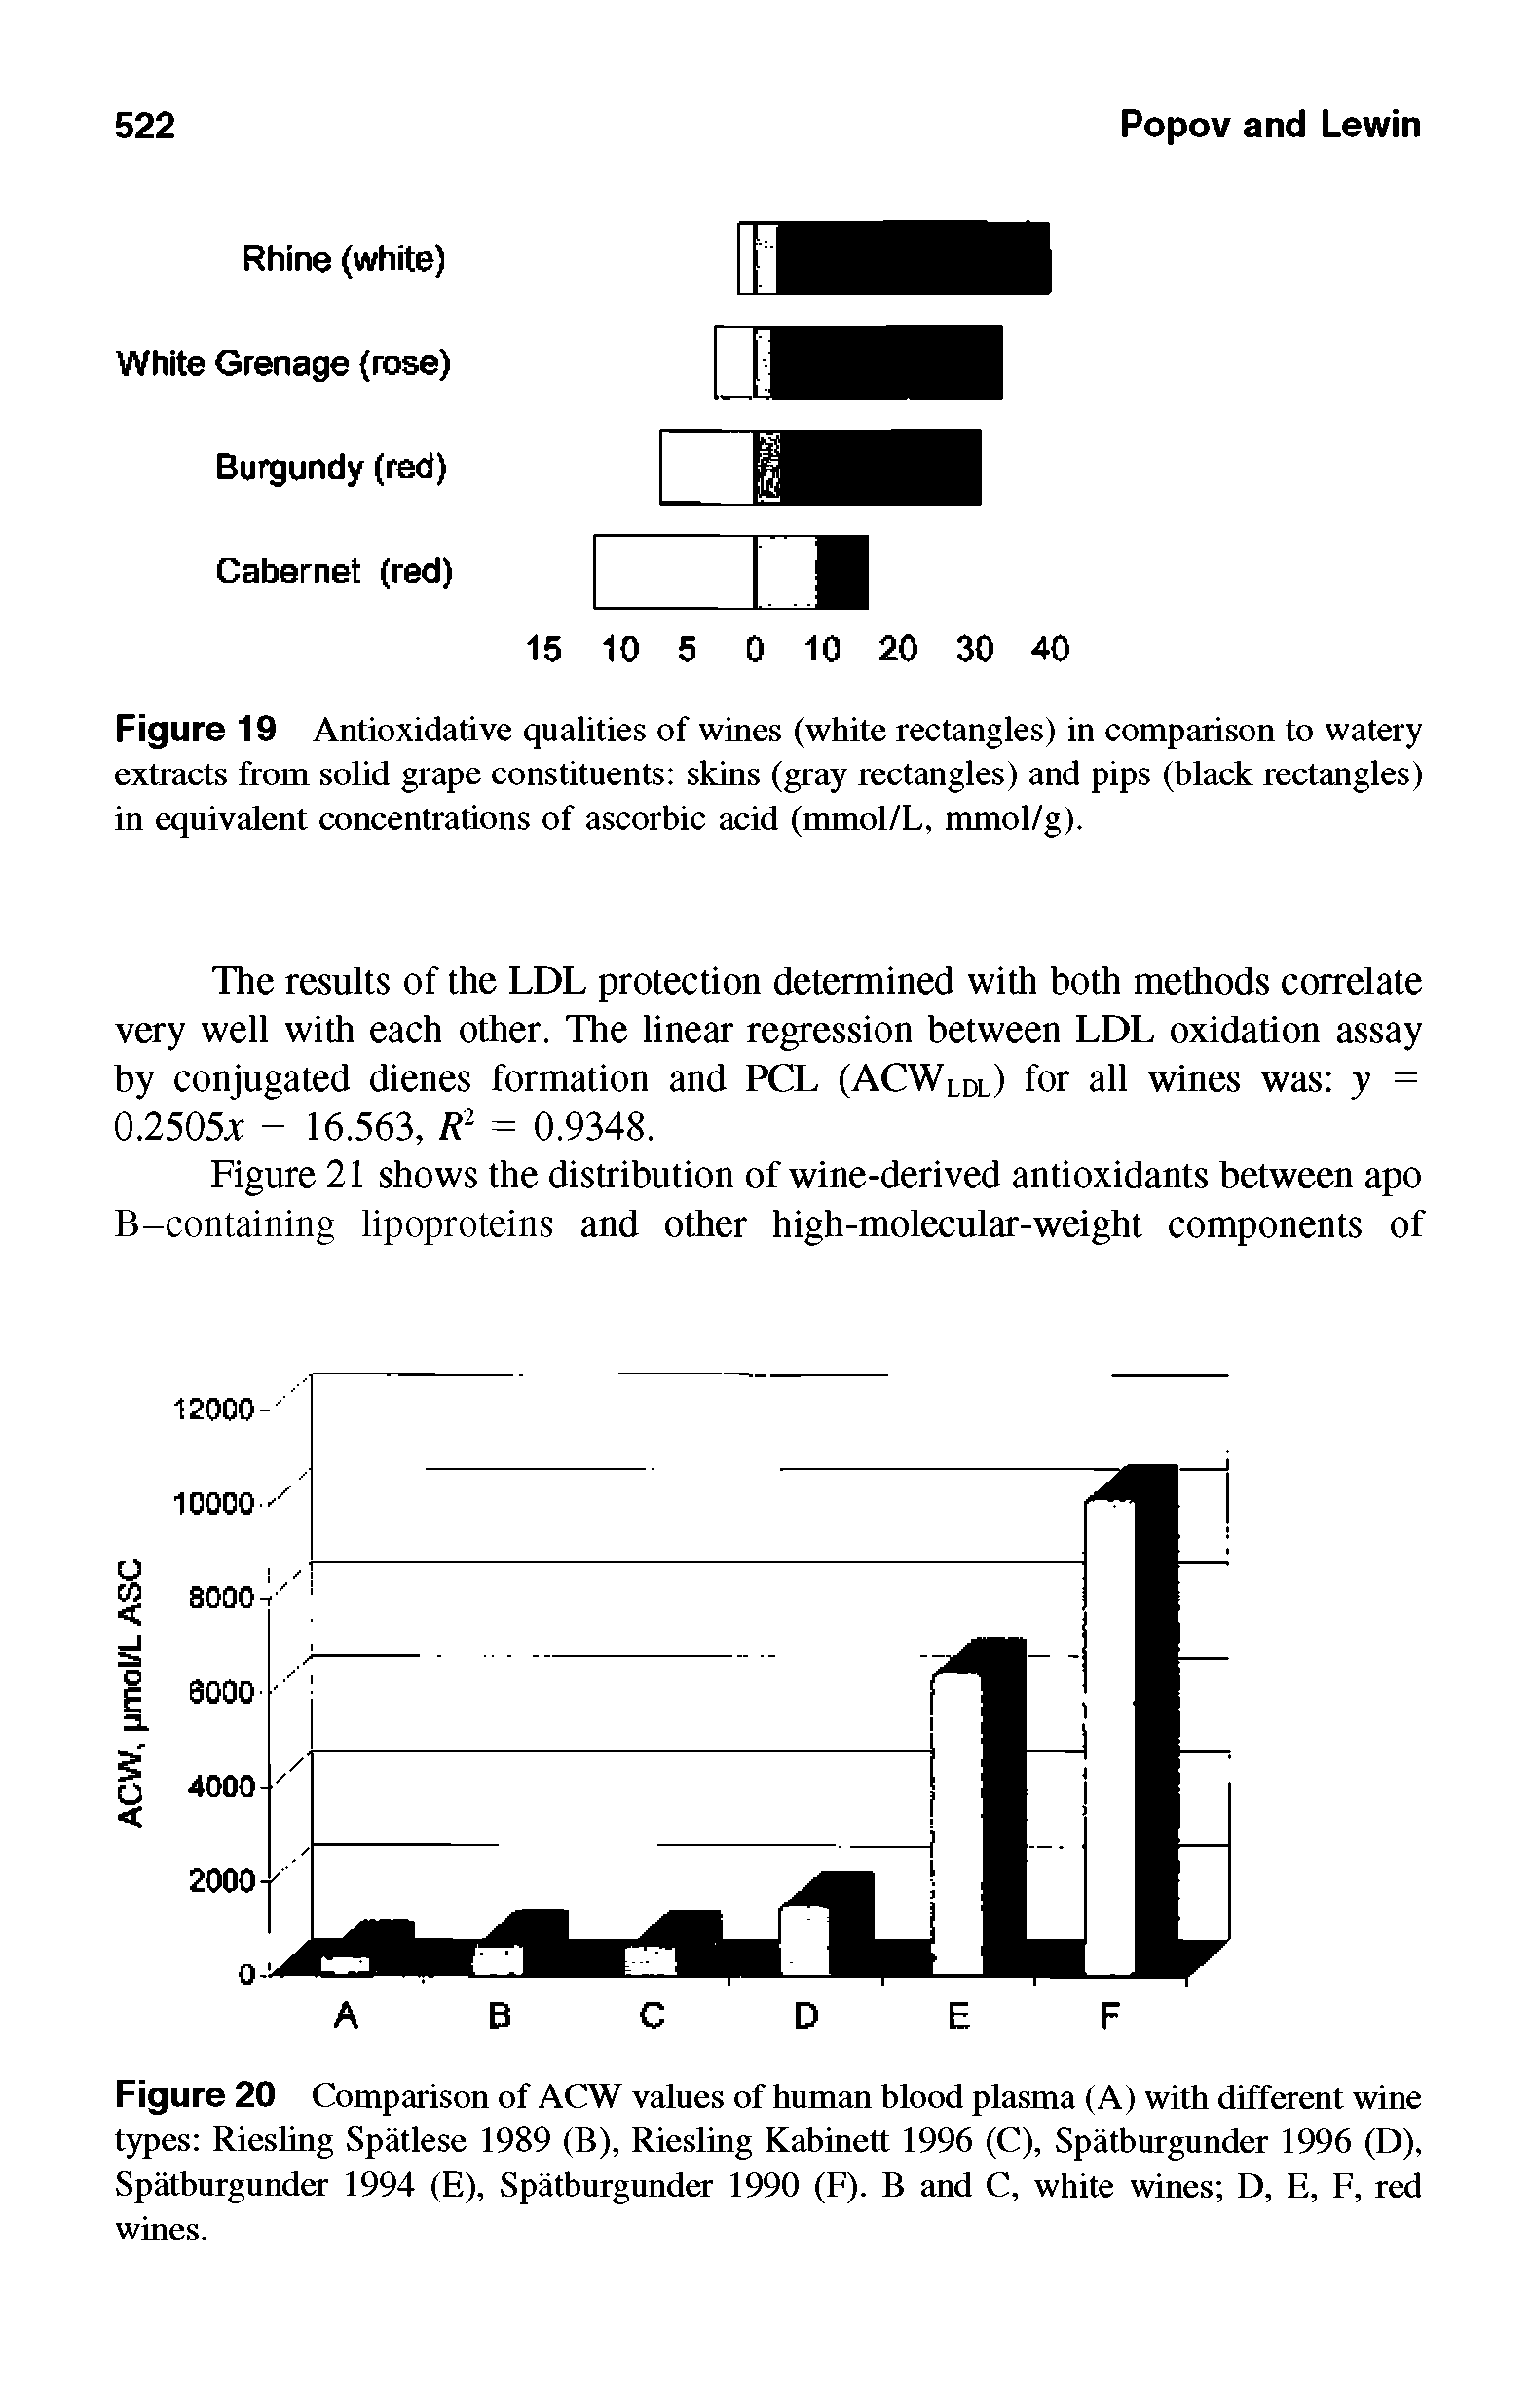 Figure 20 Comparison of ACW values of human blood plasma (A) with different wine types Riesling Spatlese 1989 (B), Riesling Kabinett 1996 (C), Spatburgunder 1996 (D), Spatburgunder 1994 (E), Spatburgunder 1990 (F). B and C, white wines D, E, F, red...